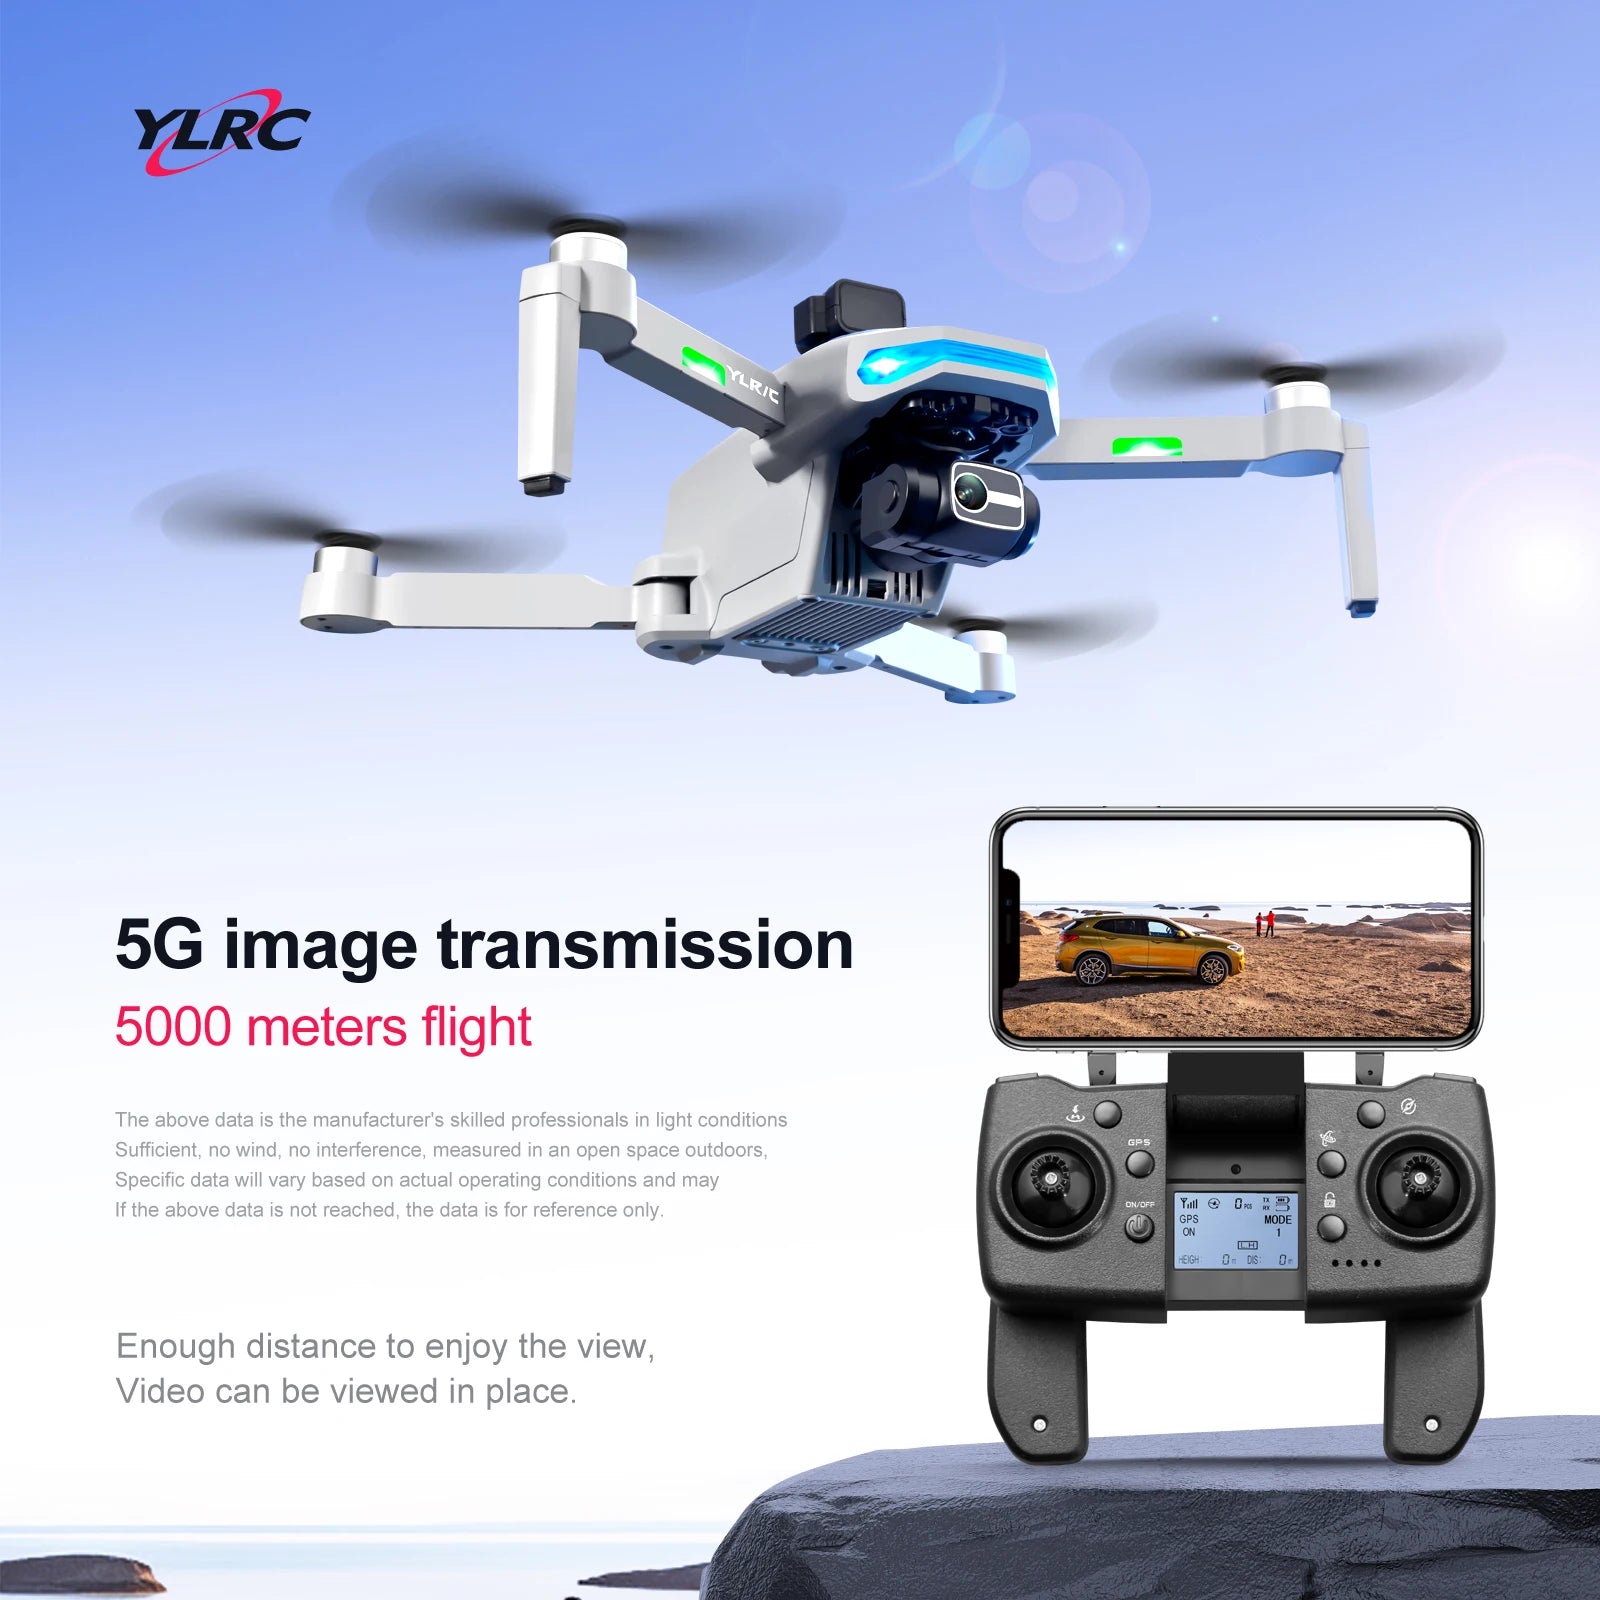 S135 Drone, YLriC 5G image transmission 5000 meters flight The above data is the